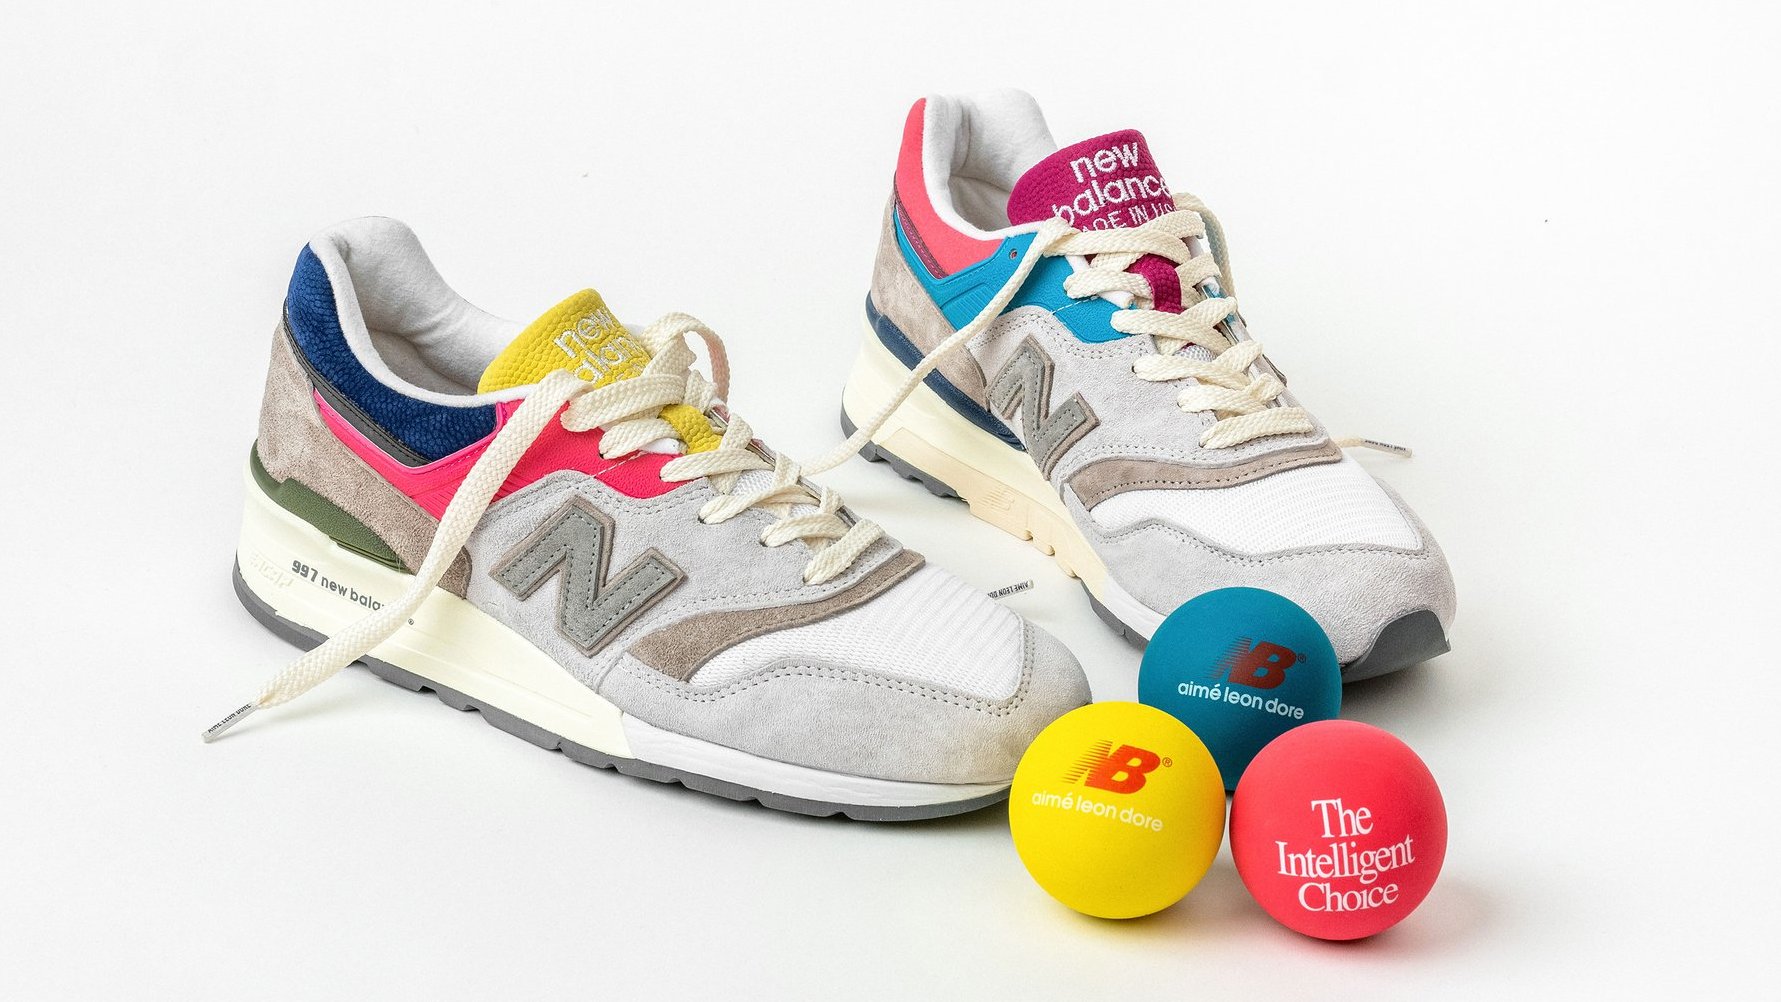 Aimé Leon Dore x New Balance 990v2 Collaboration Could Be on the